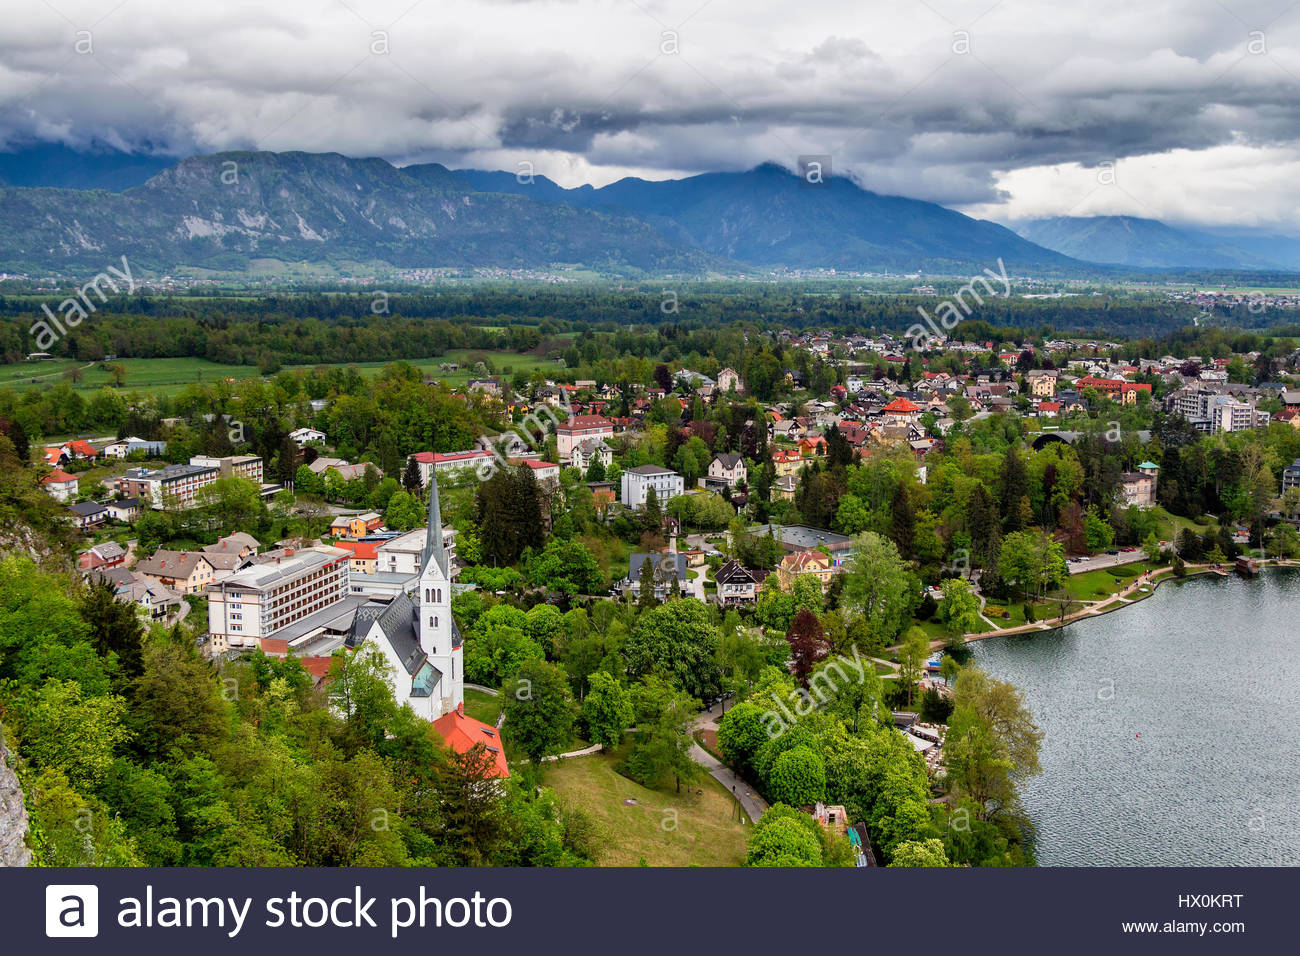 Aerial Of Bled City With Alps Mountains In The Background